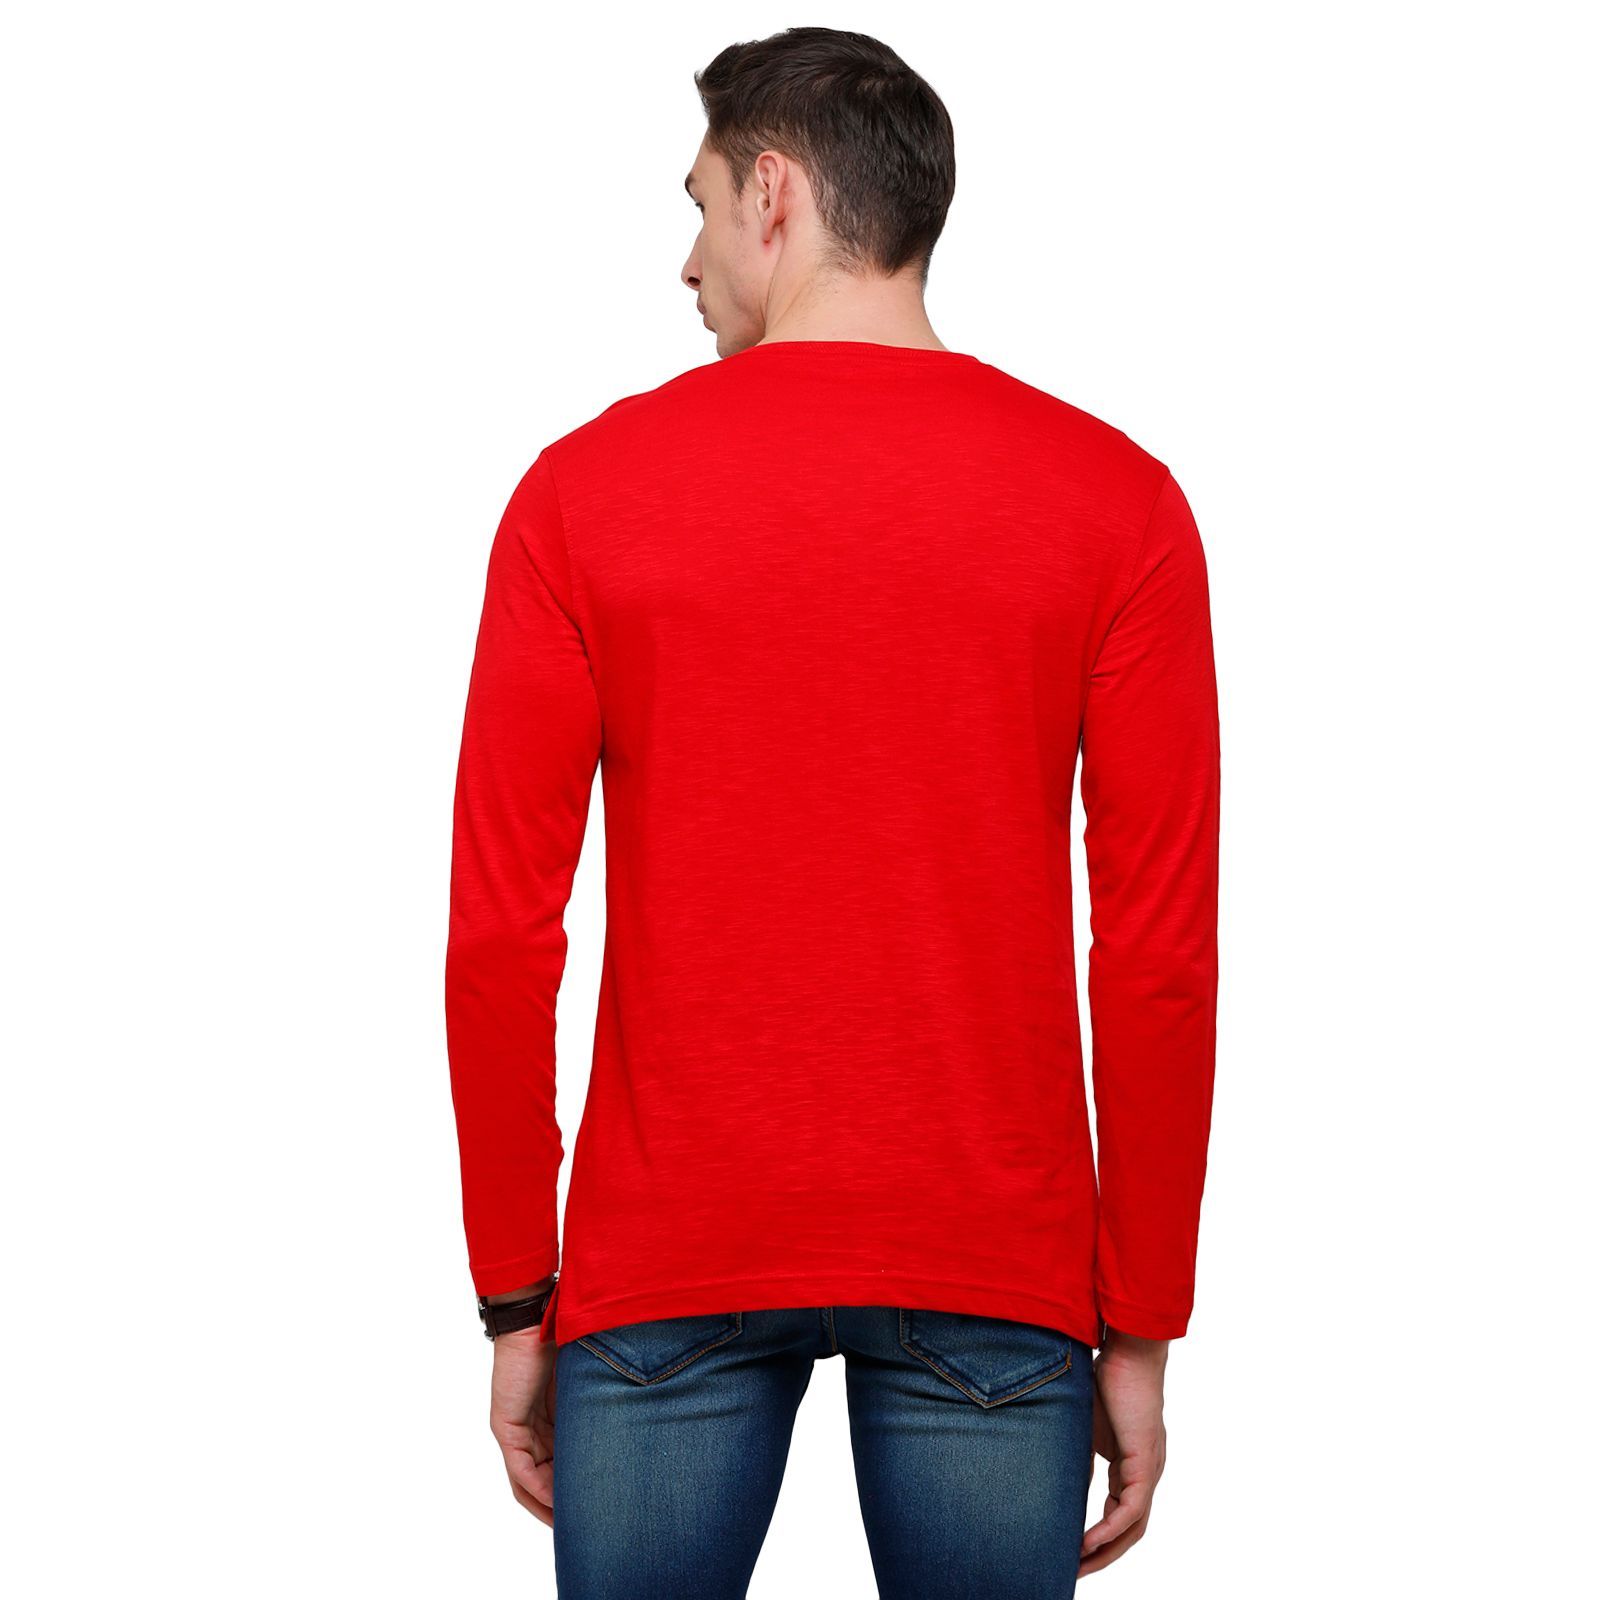 Classic polo Men's Red Full Sleeve Slim Fit Henley Crew T-Shirt - Ozel-True Red T-Shirt Classic Polo 